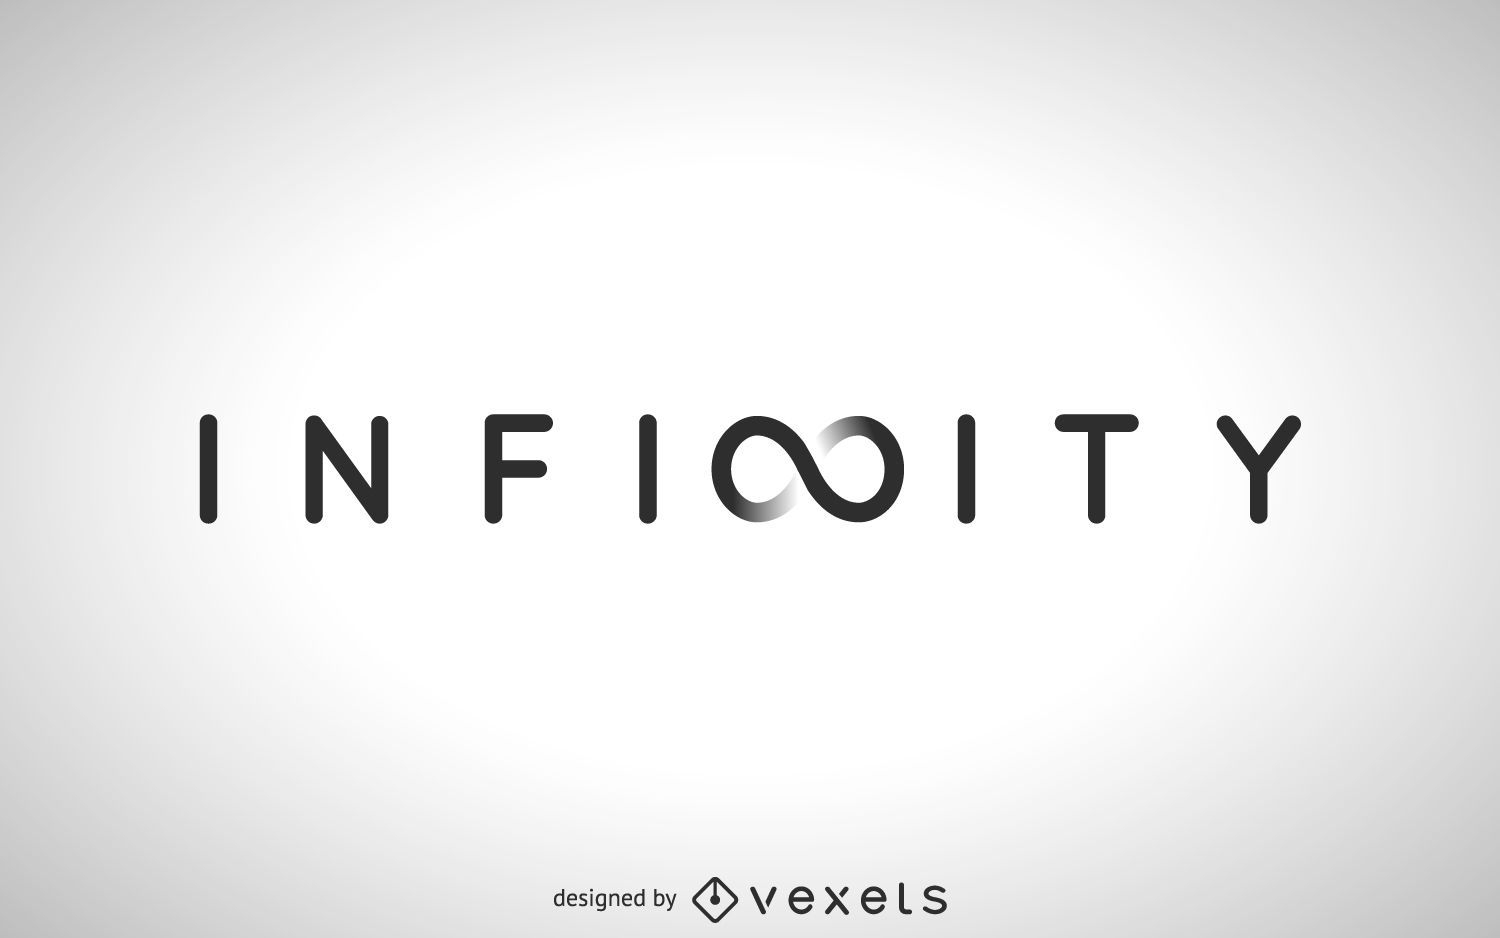 Infinity Logo Template Collection Vector Download